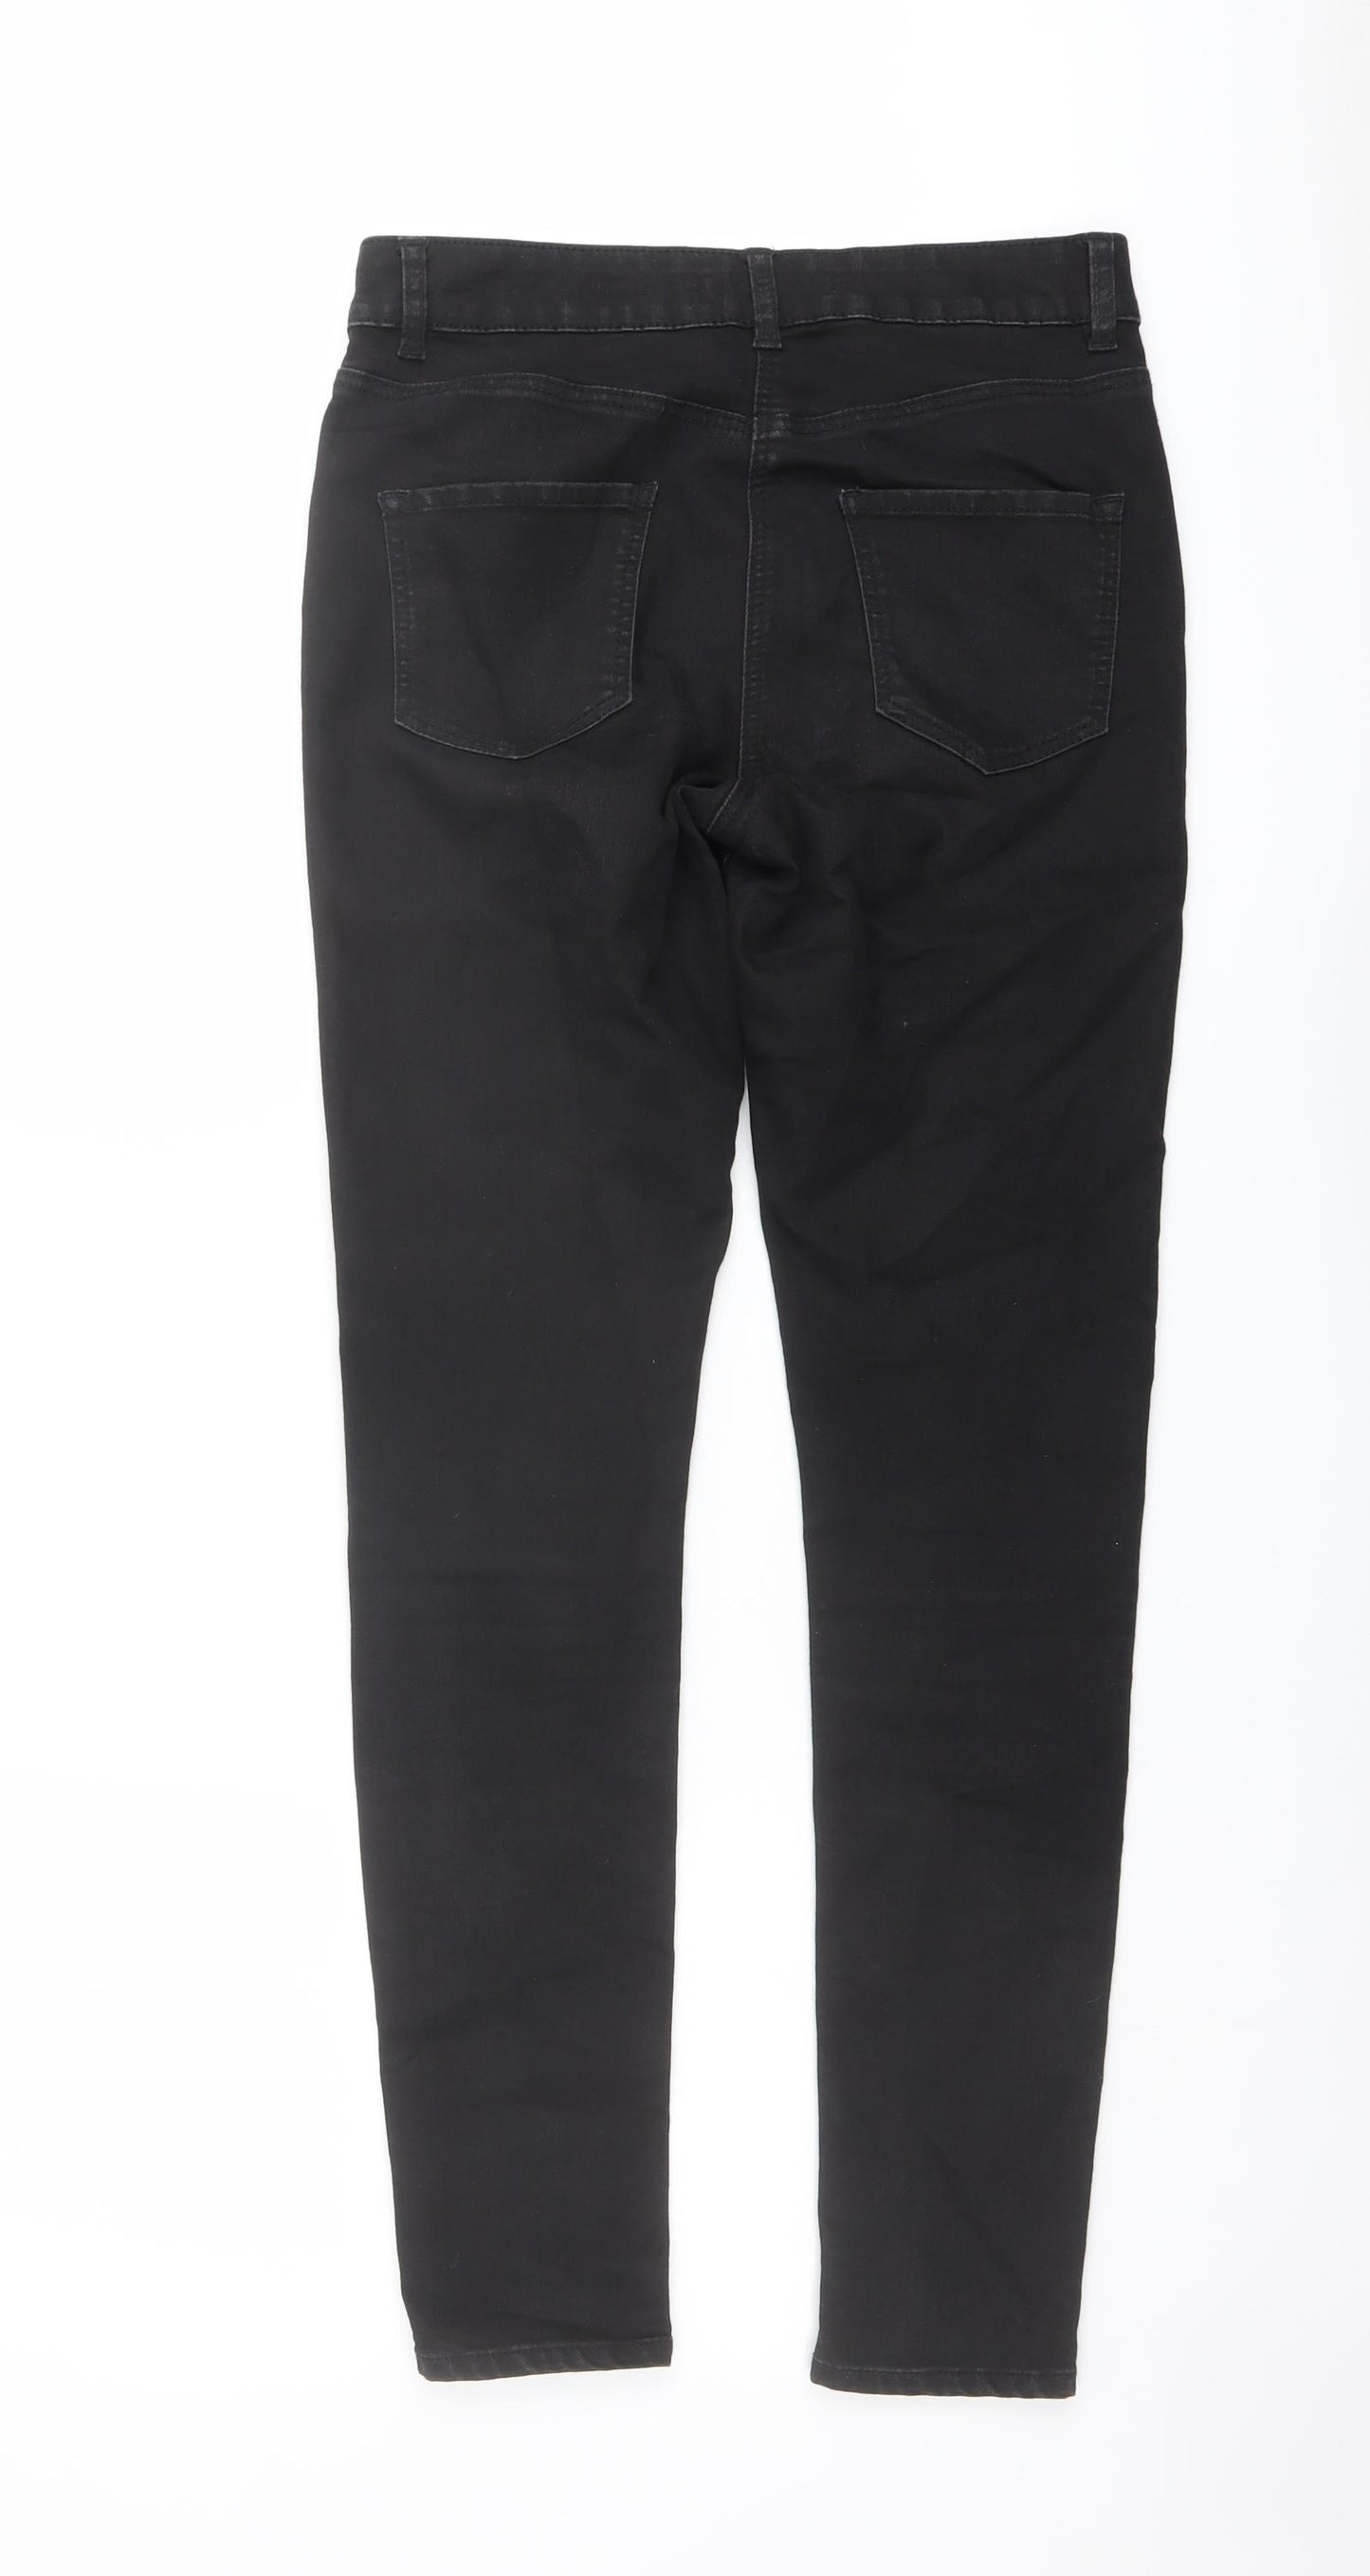 George Womens Black Cotton Skinny Jeans Size 10 L29 in Regular Button